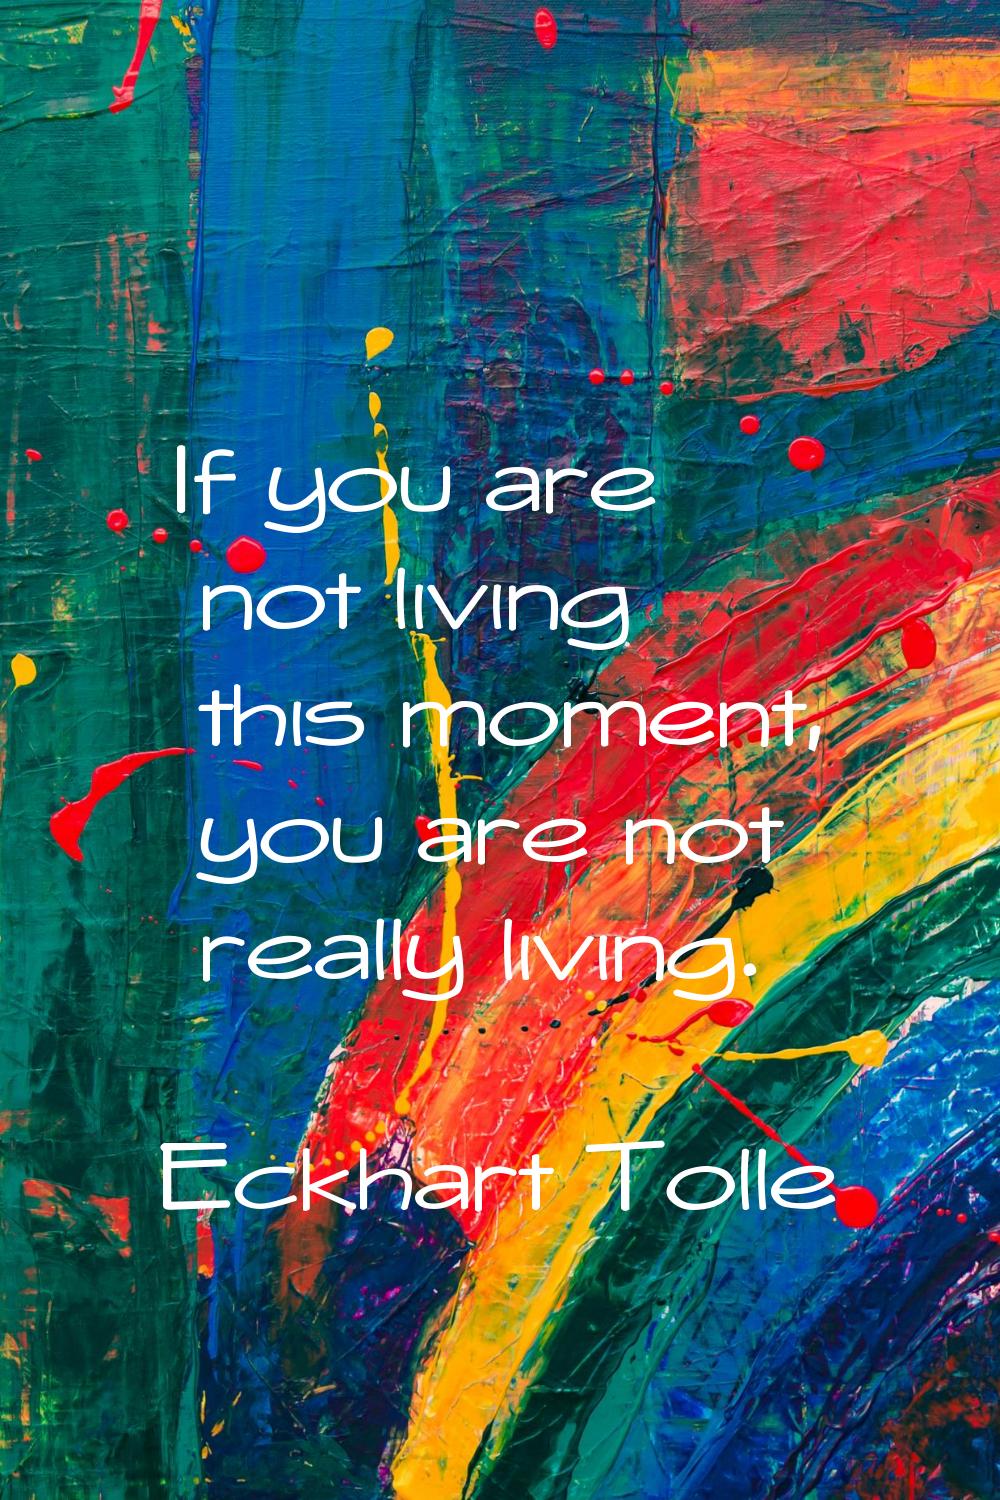 If you are not living this moment, you are not really living.